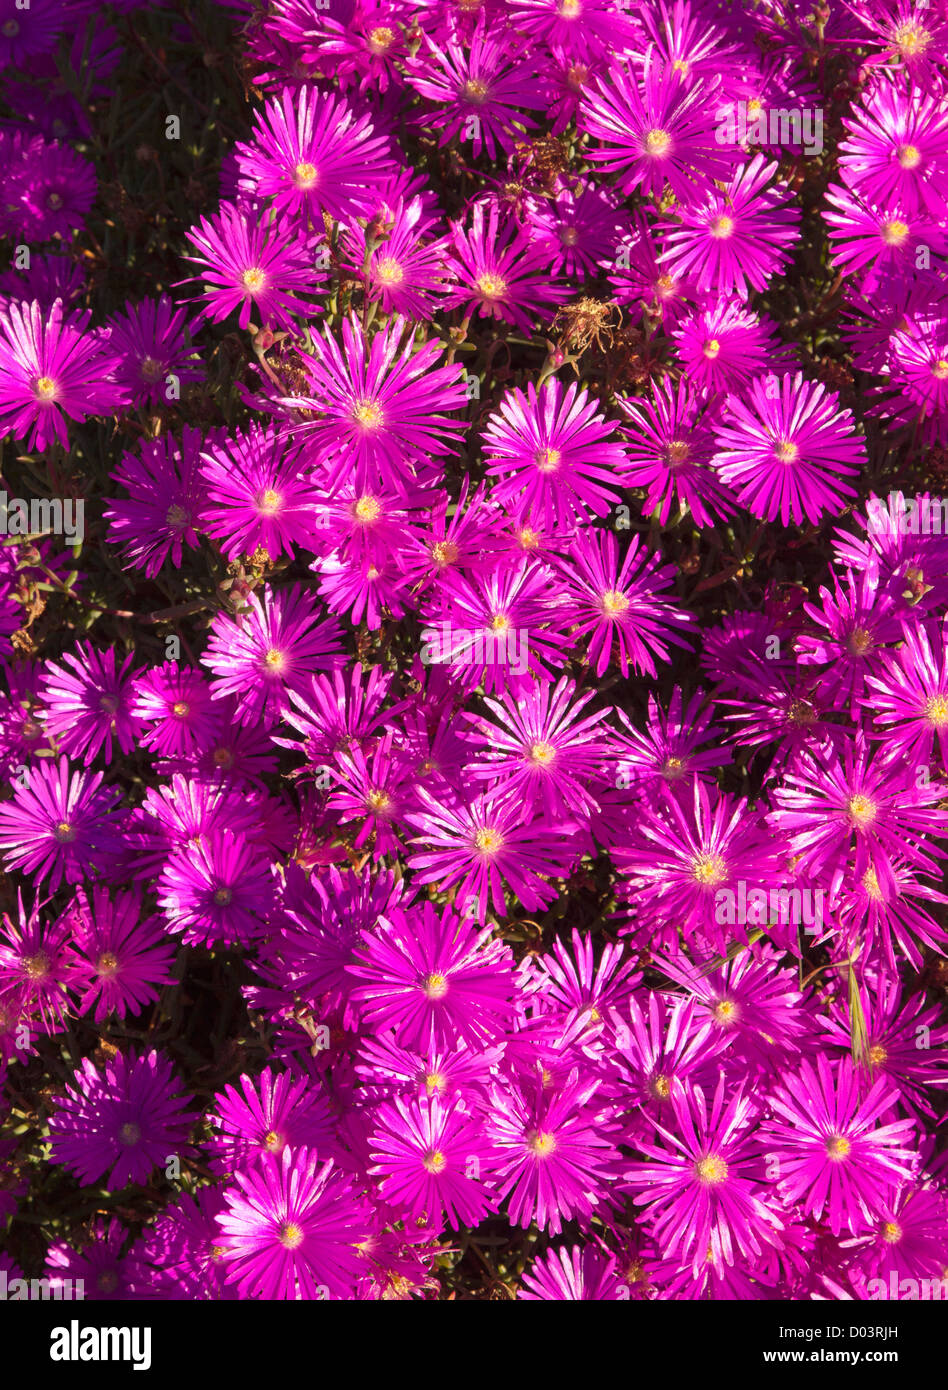 A shocking pink ice plant bloom. Stock Photo